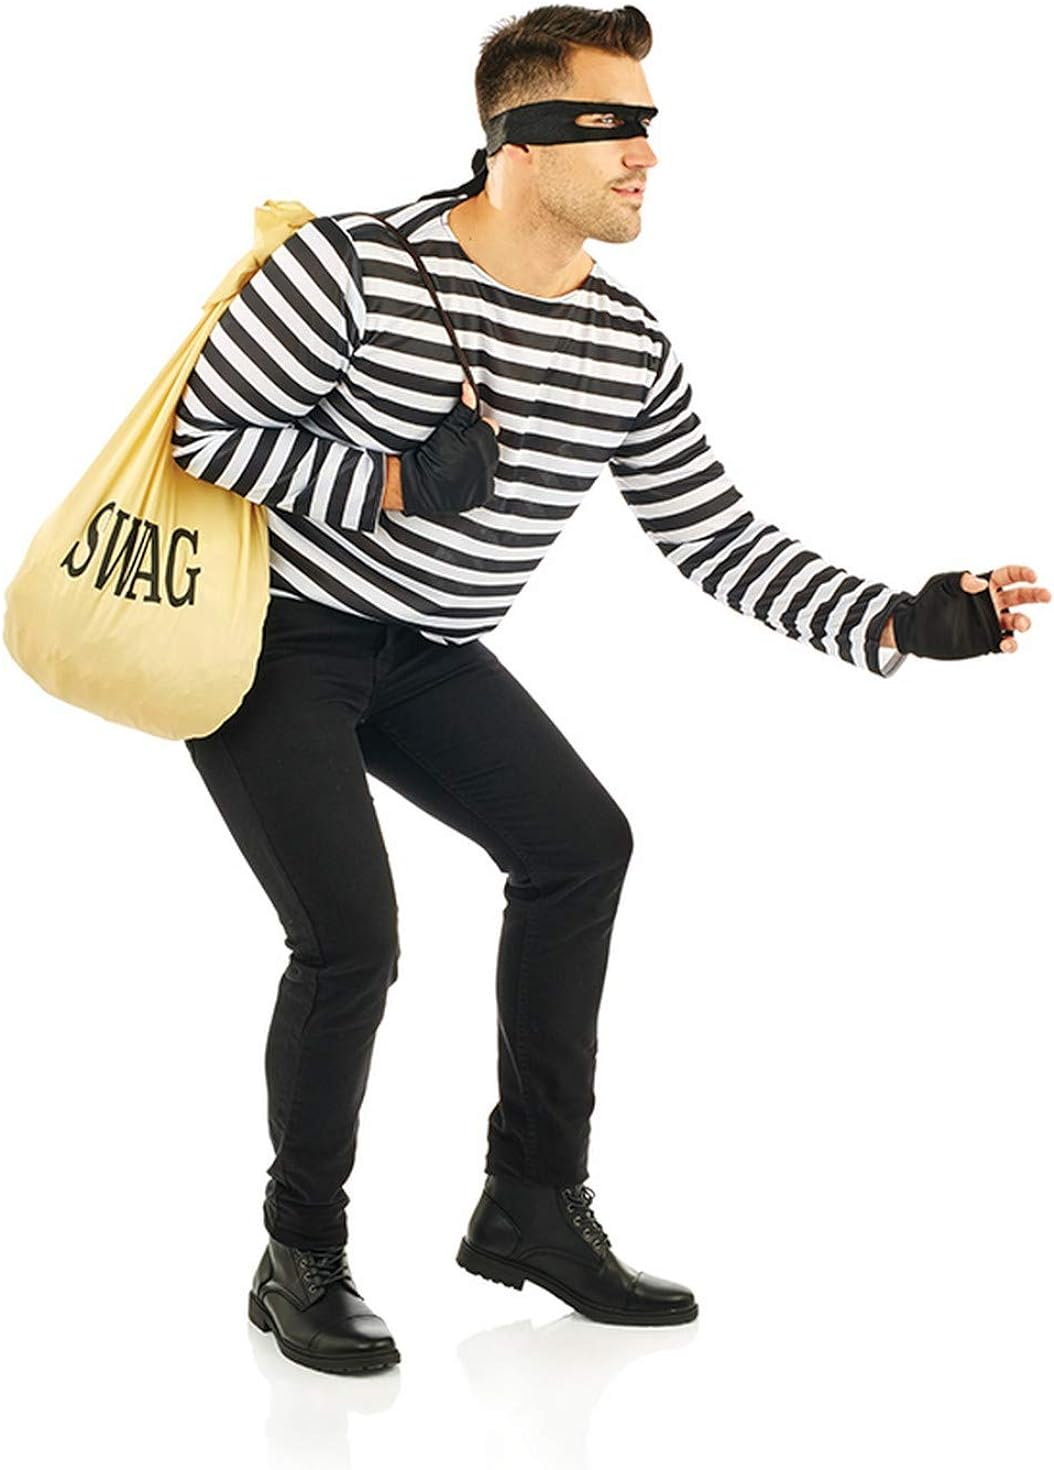 Burglar in a black mask and striped shirt.